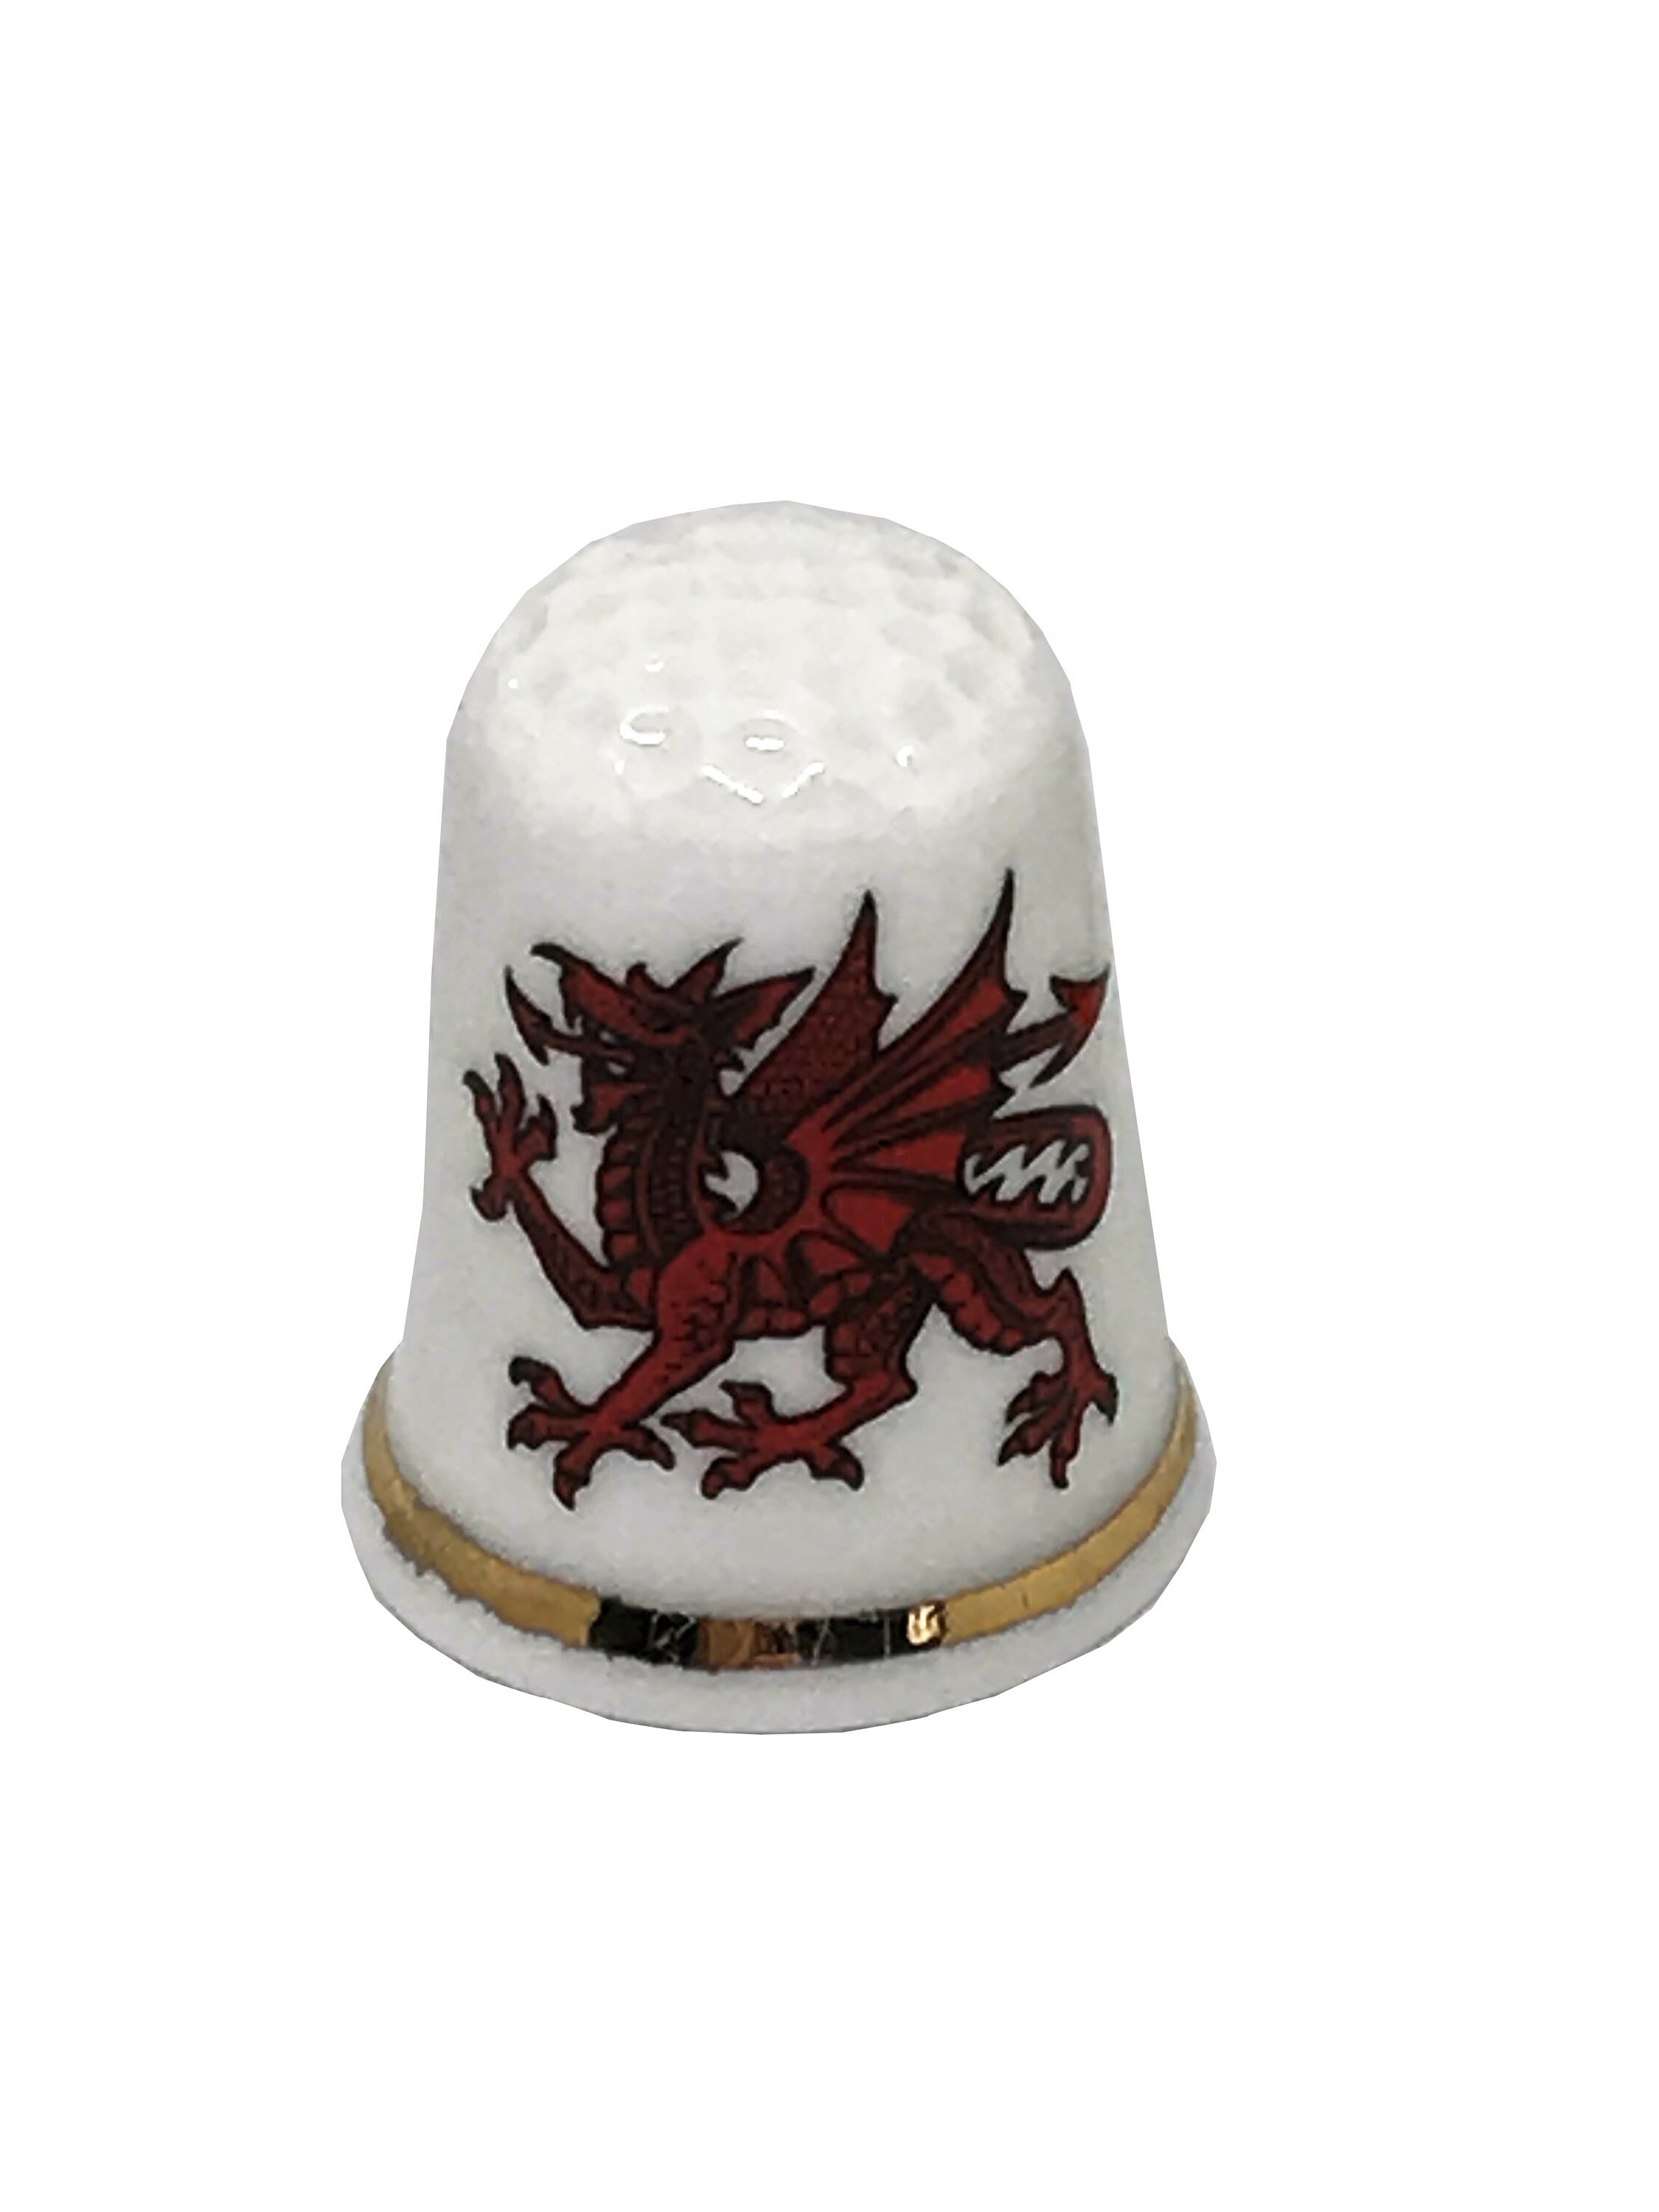 Fine Bone China Collectable Thimble BN Personalised Welsh Dragon Thimble 